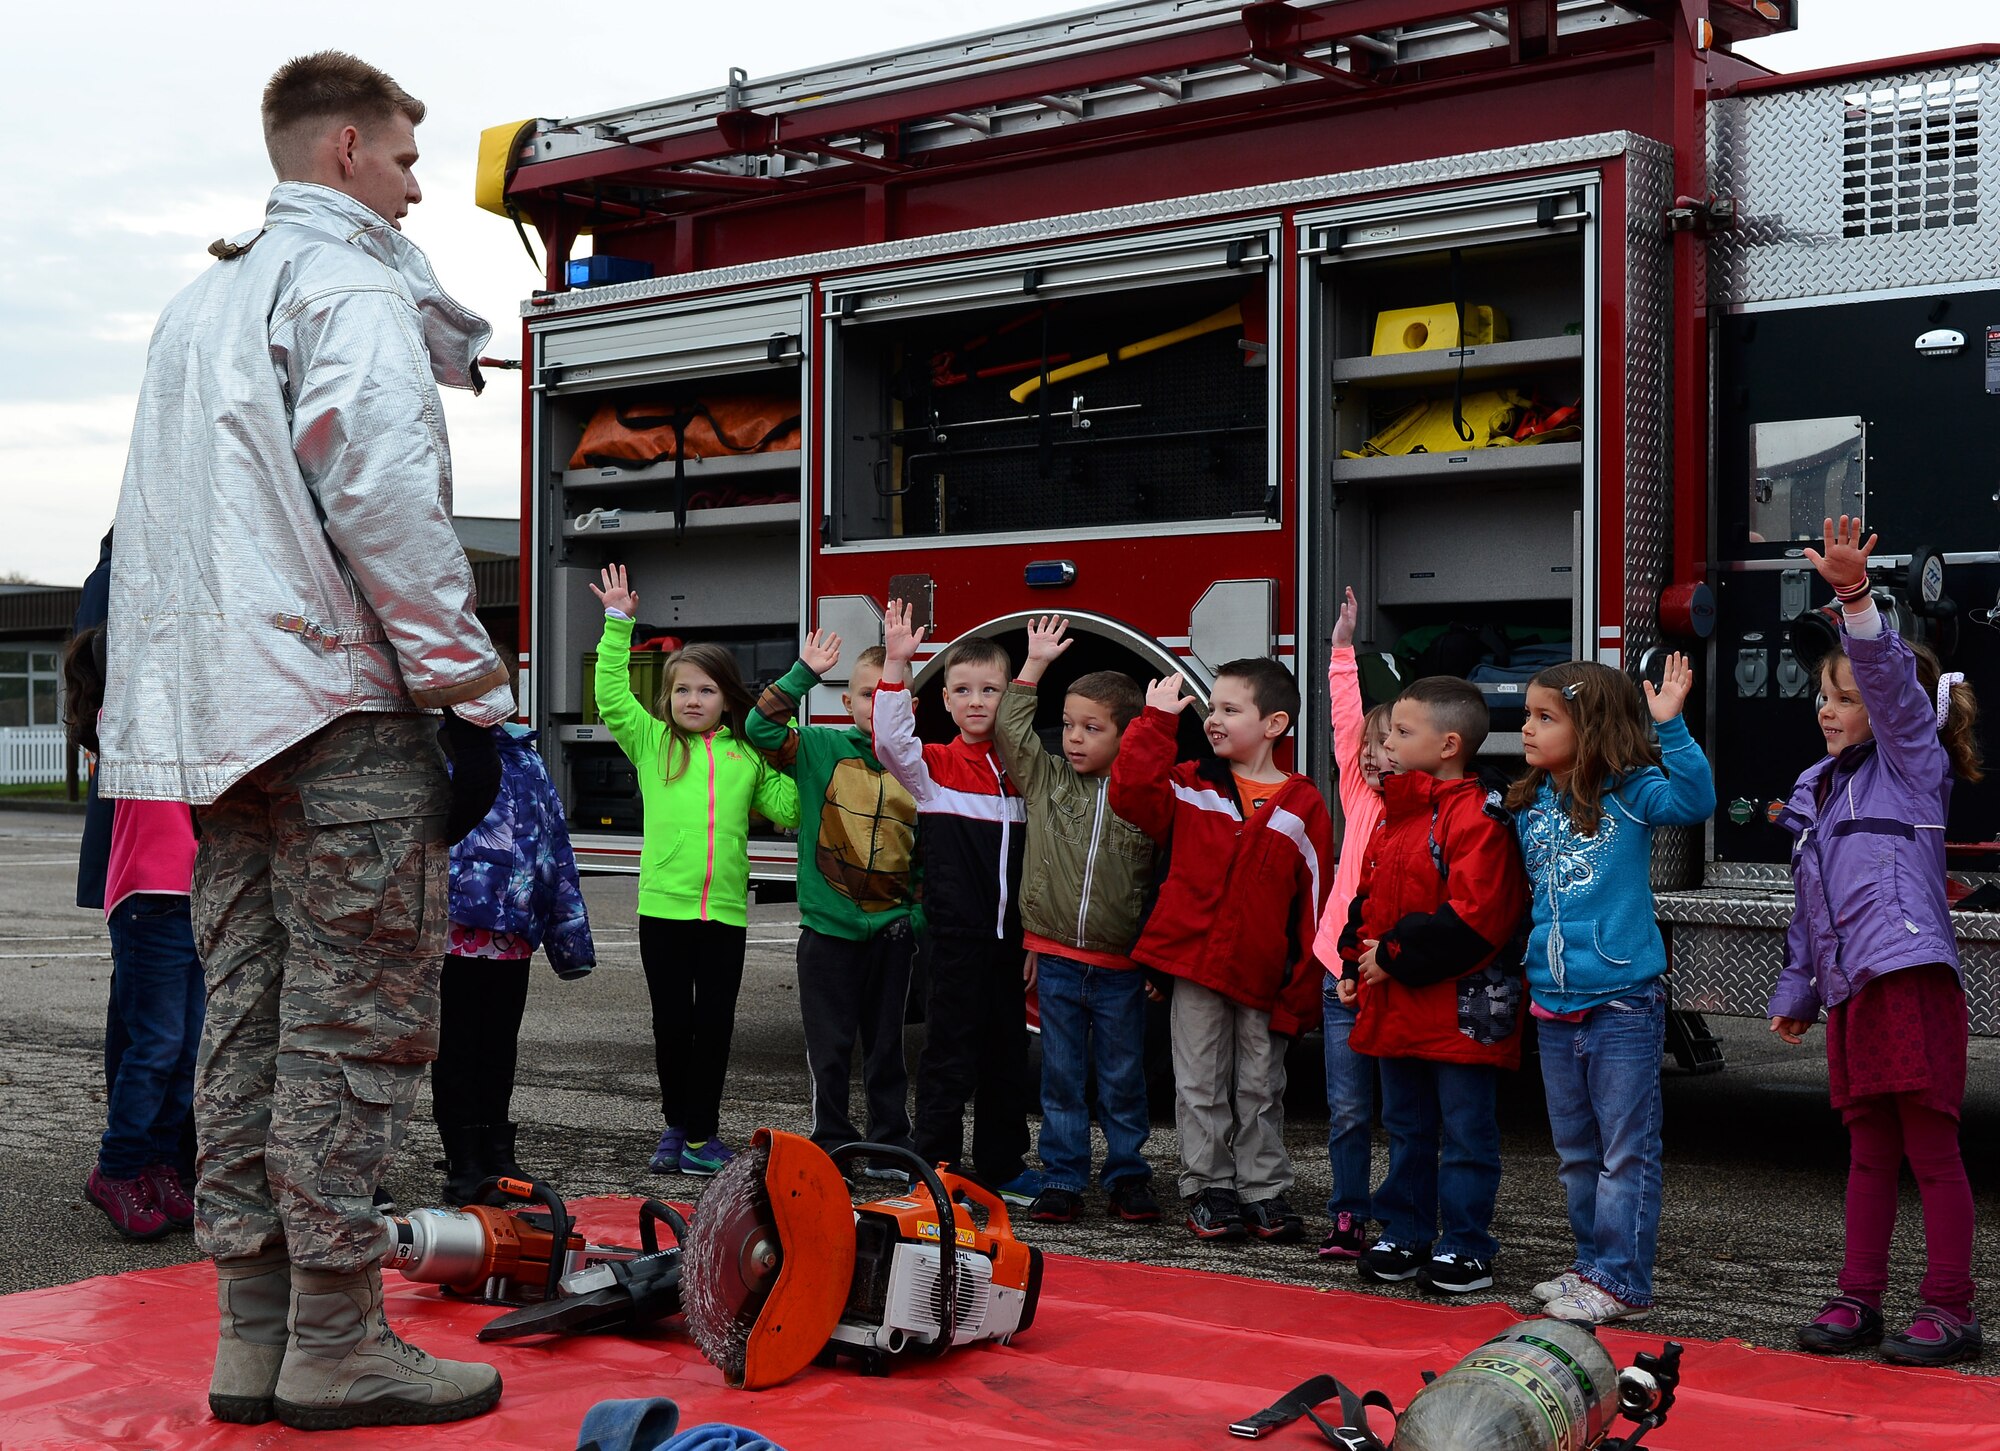 U.S. Air Force Tech. Sgt. Andrew J. Kehl, a 52nd Civil Engineer Squadron firefighter and native of Palm Springs, Calif., talks to a class about being a firefighter while visiting Spangdahlem Elementary School at Spangdahlem Air Base, Germany, Oct. 8, 2014. Fire Prevention Week includes school visits from the 52nd CES firefighters along with many other events. (U.S. Air Force photo by Airman 1st Class Luke J. Kitterman/Released)